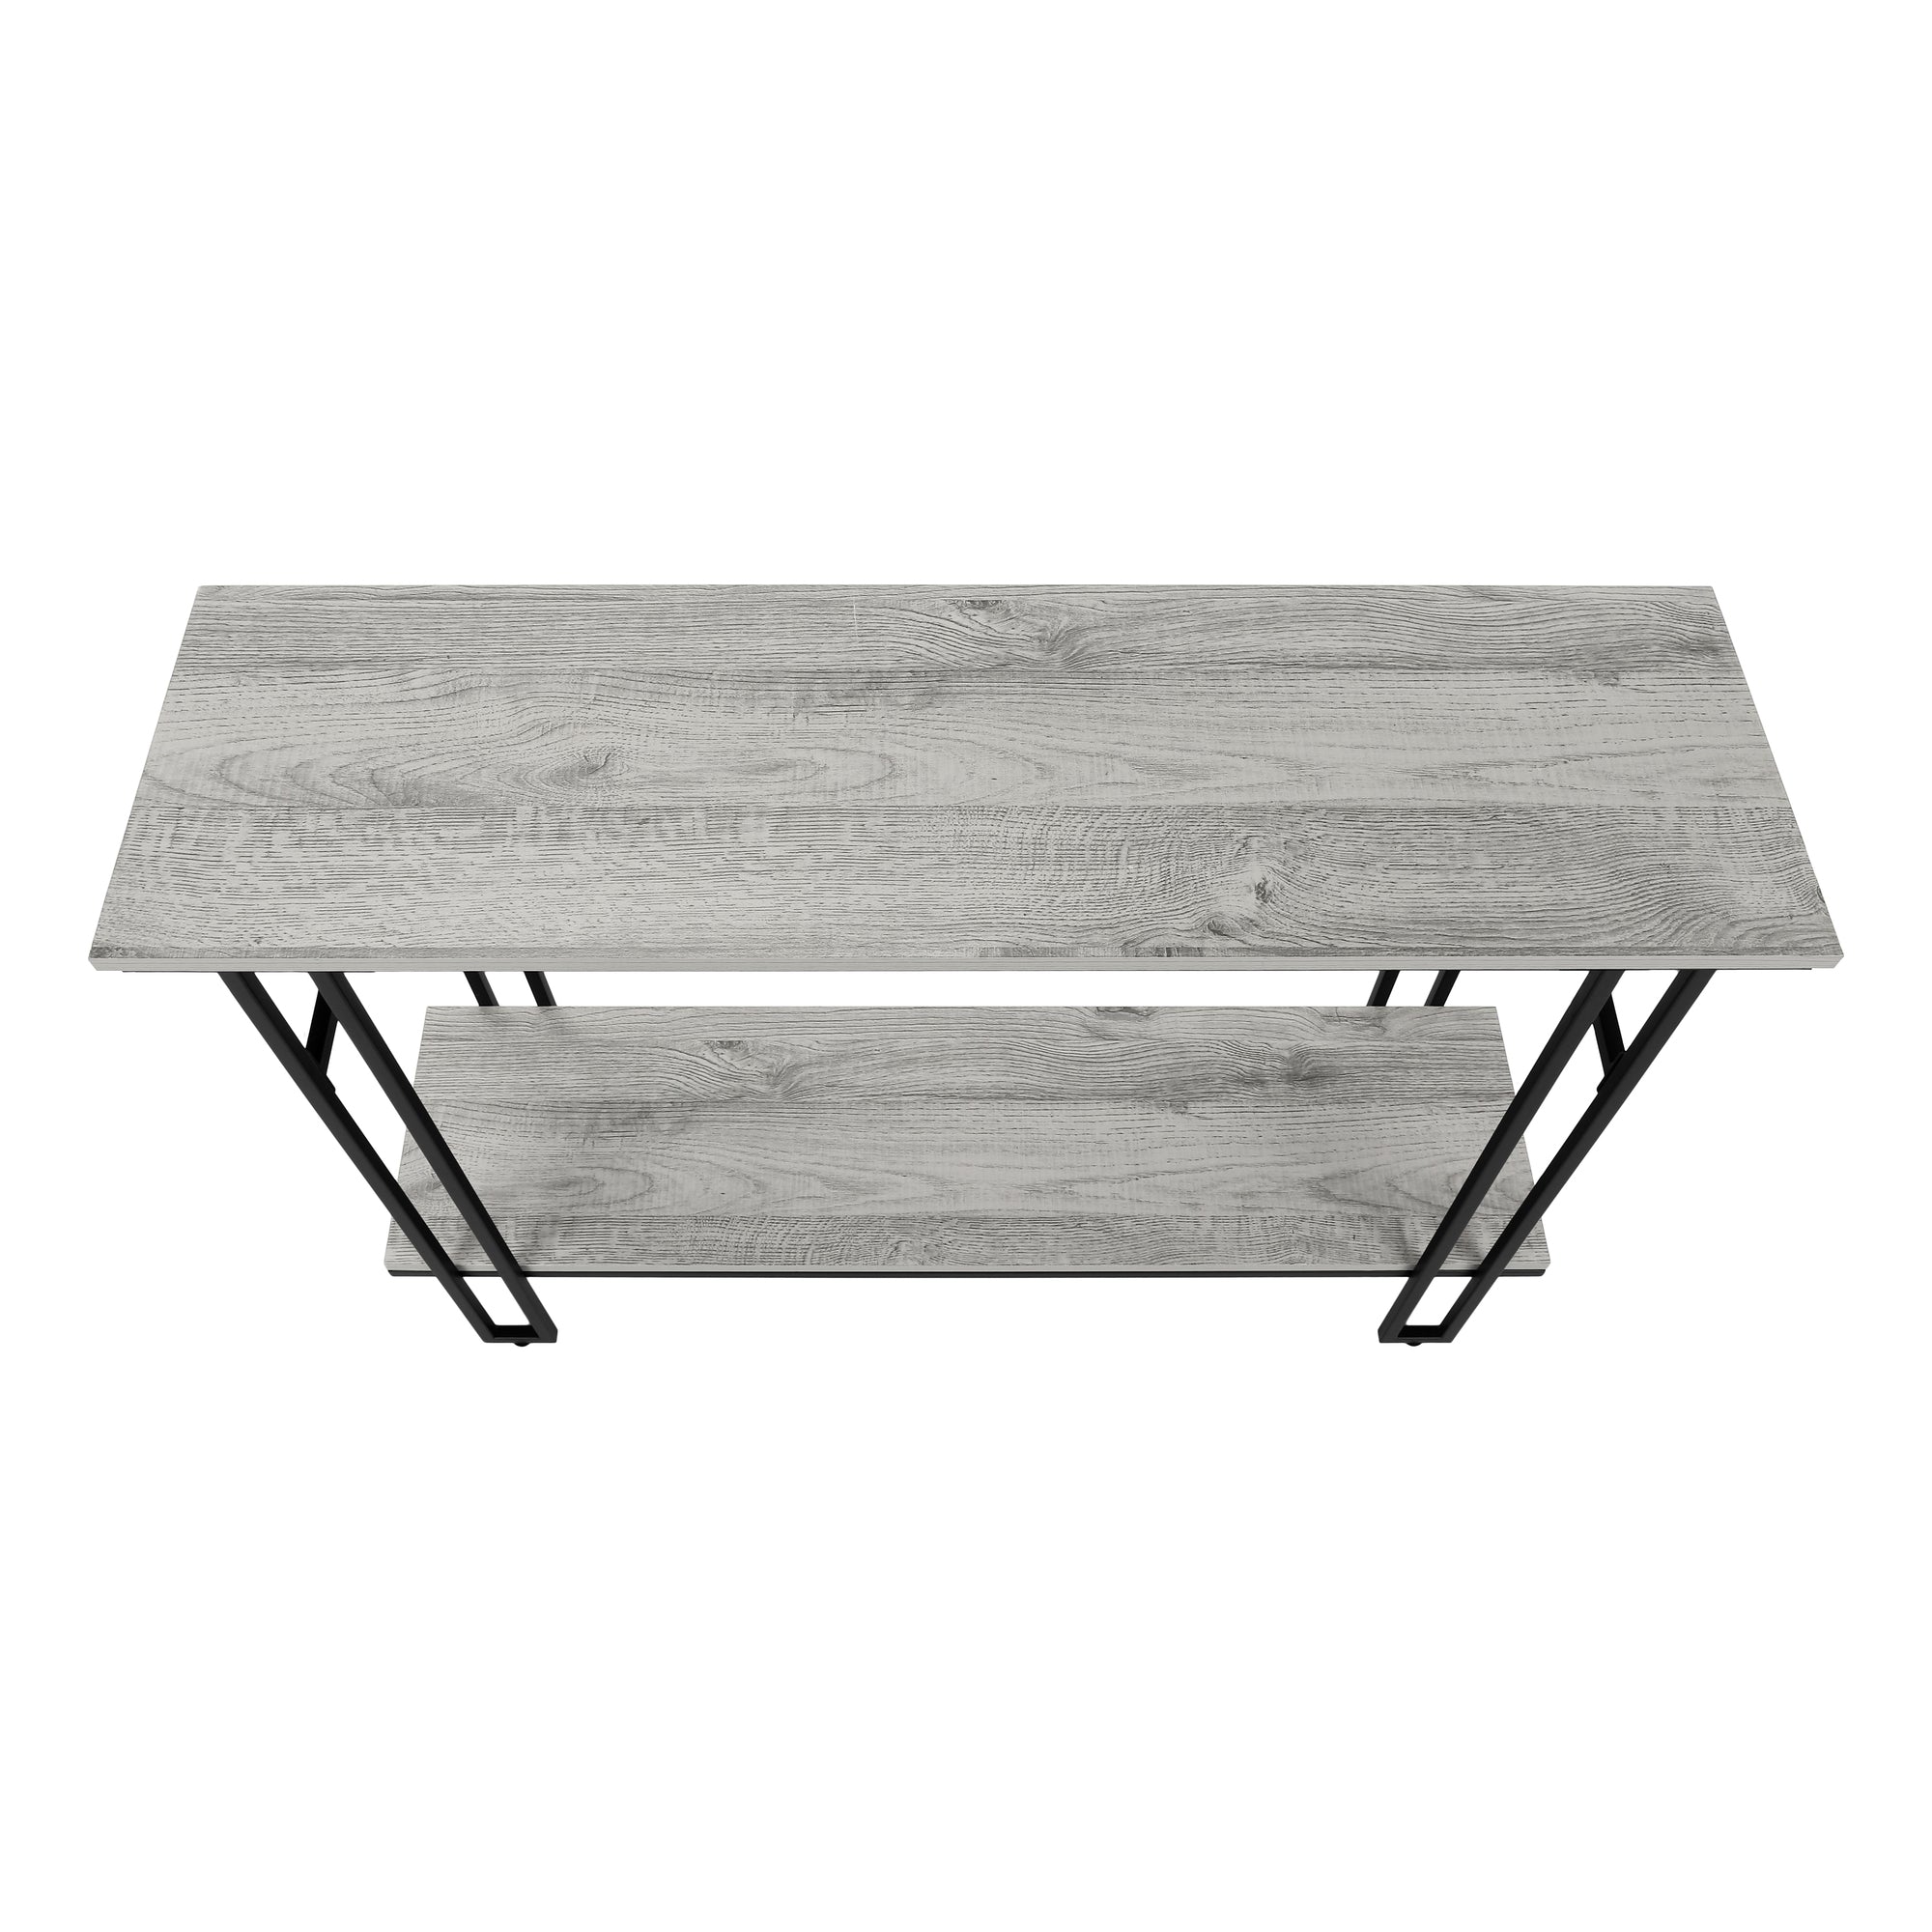 MN-393576    Accent Table, Console, Entryway, Narrow, Sofa, Living Room, Bedroom, Metal Frame, Laminate, Grey, Black, Contemporary, Modern